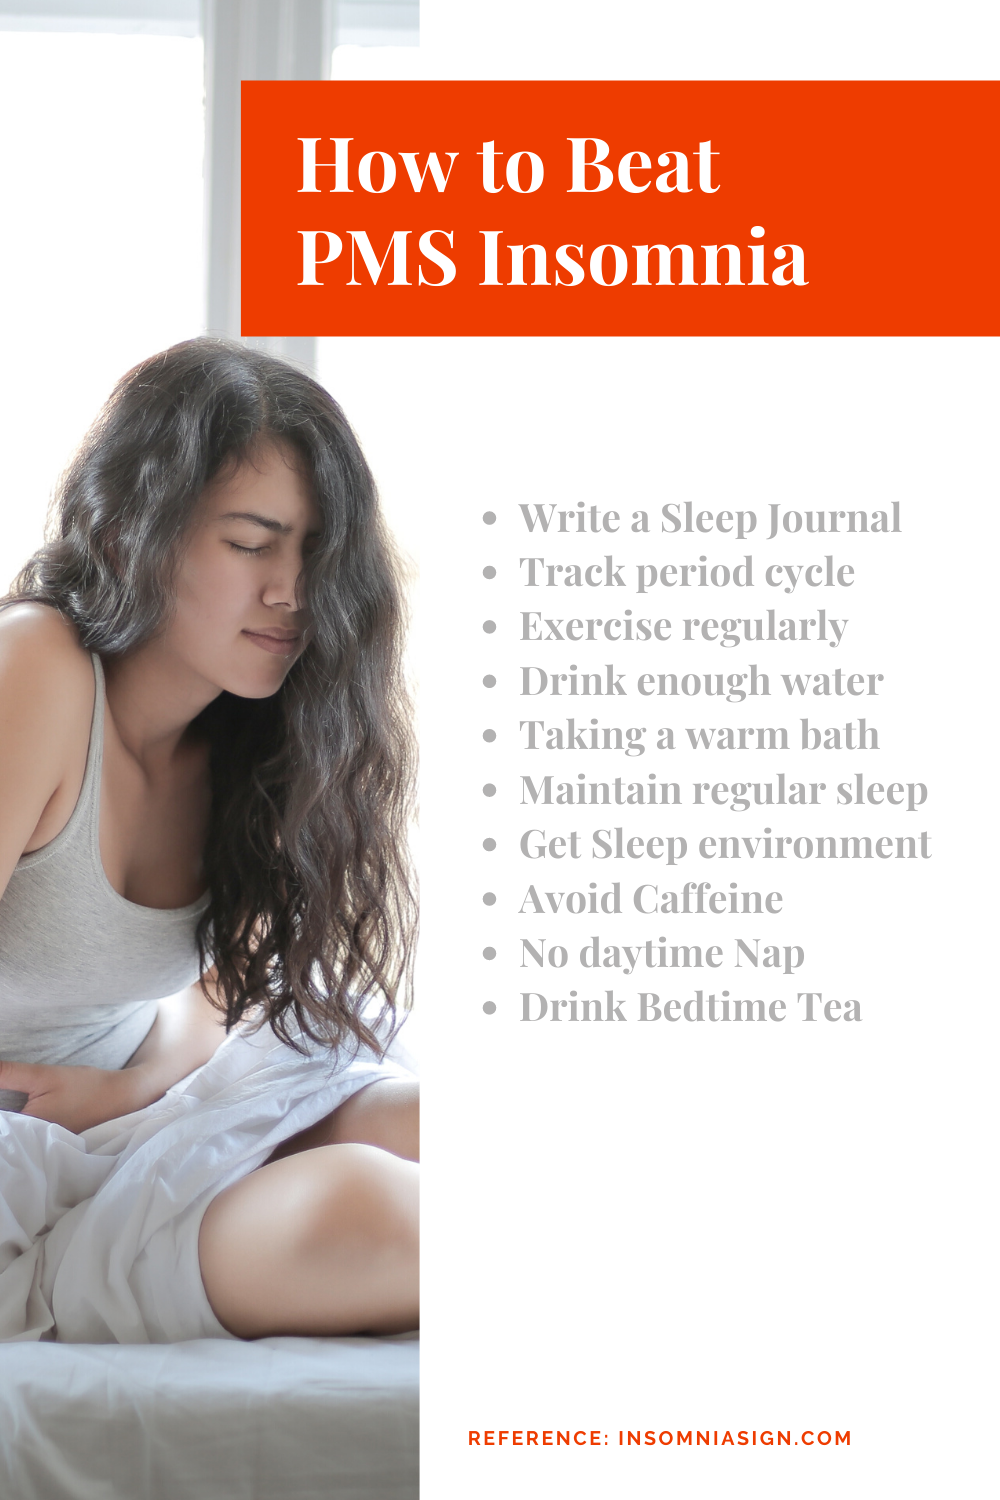 How to Beat PMS Insomnia